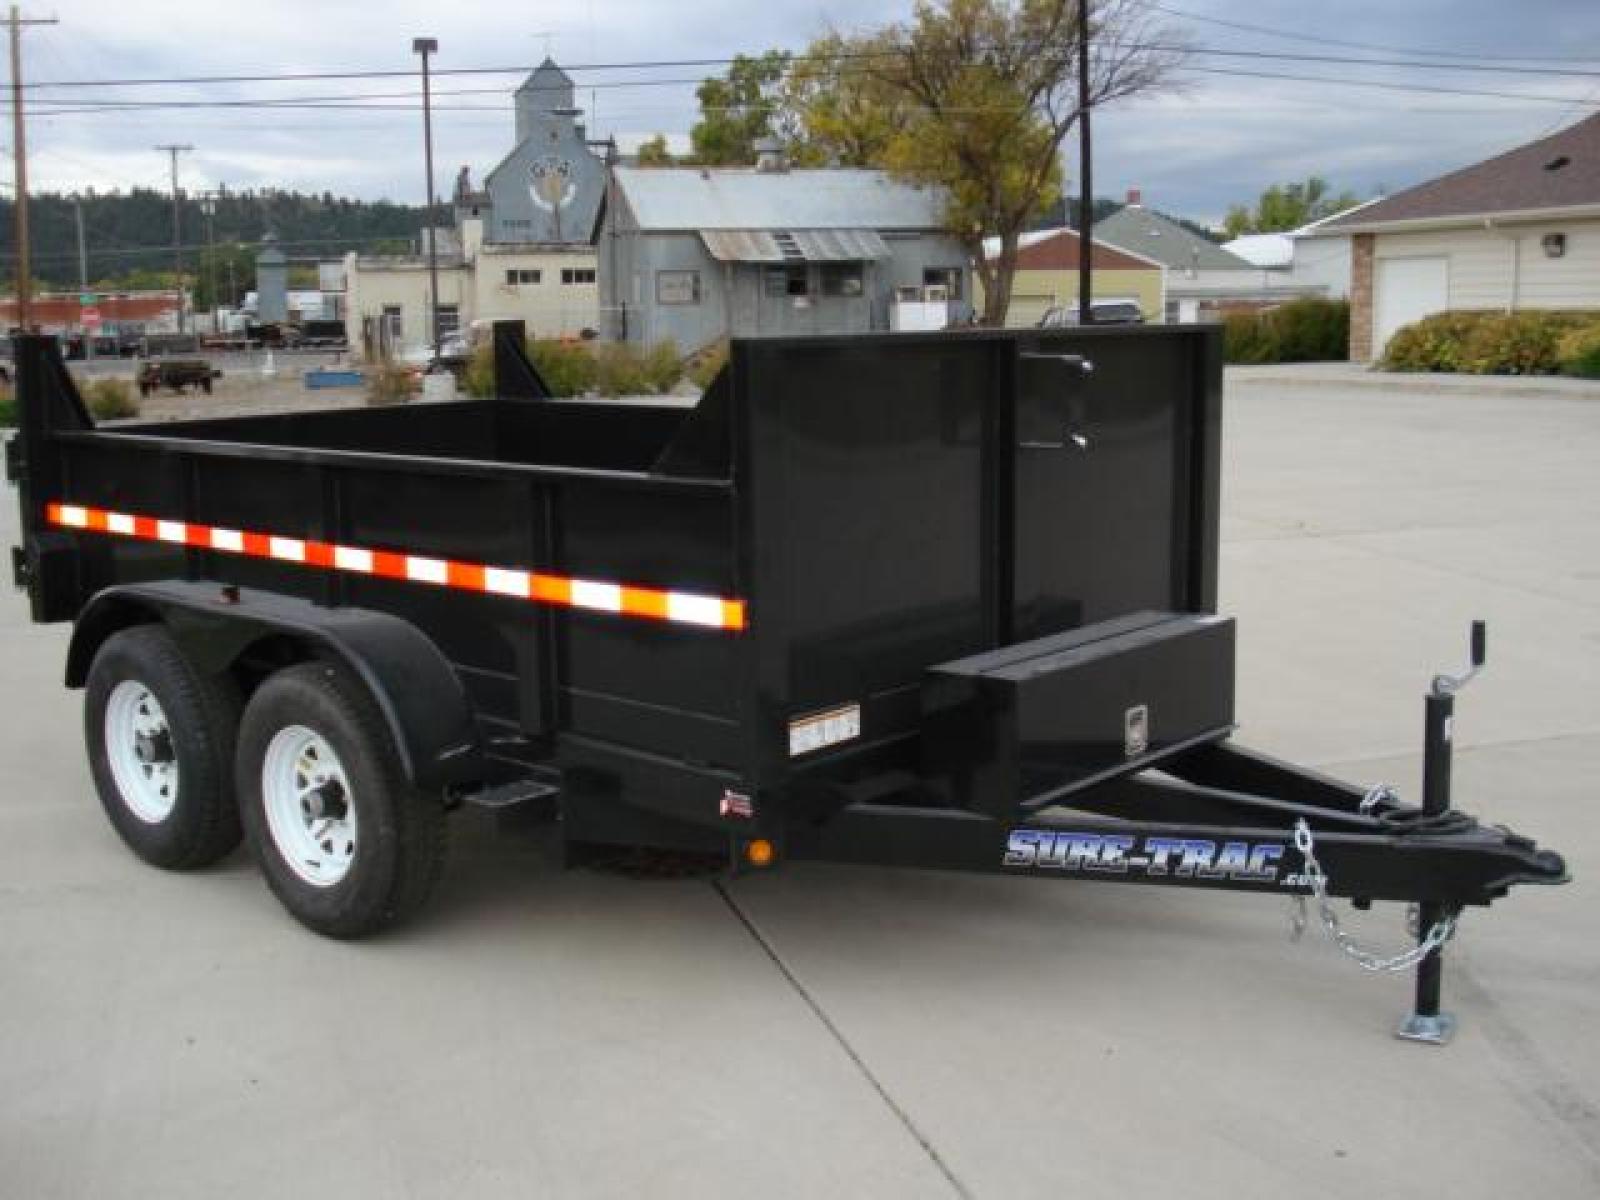 2022 Black SureTrac 6 x10 Lo Pro Dump Trailer , located at 310 West 1st Ave, Big Timber, MT, 59011, (406) 860-8510, 45.833511, -109.957809 - SURE-TRAC 6 X 10 LO PRO DUMP TRAILER, 10K GVW, SINGLE RAM HOIST, EZ LUBE HUBS, DUAL REAR GATE, BRAKES BOTH AXLES, EZ LUBE HUBS, (5) D-RING TIE-DOWNS, LED LIGHTS, POWDER COAT FINISH, REAR RAMPS, MESH TARP, DEEP CYCLE BATTERY. OPTIONS: SPARE TIRE $165.00. THE BEST TRAILERS AT THE BEST PRICE!!! - Photo #5